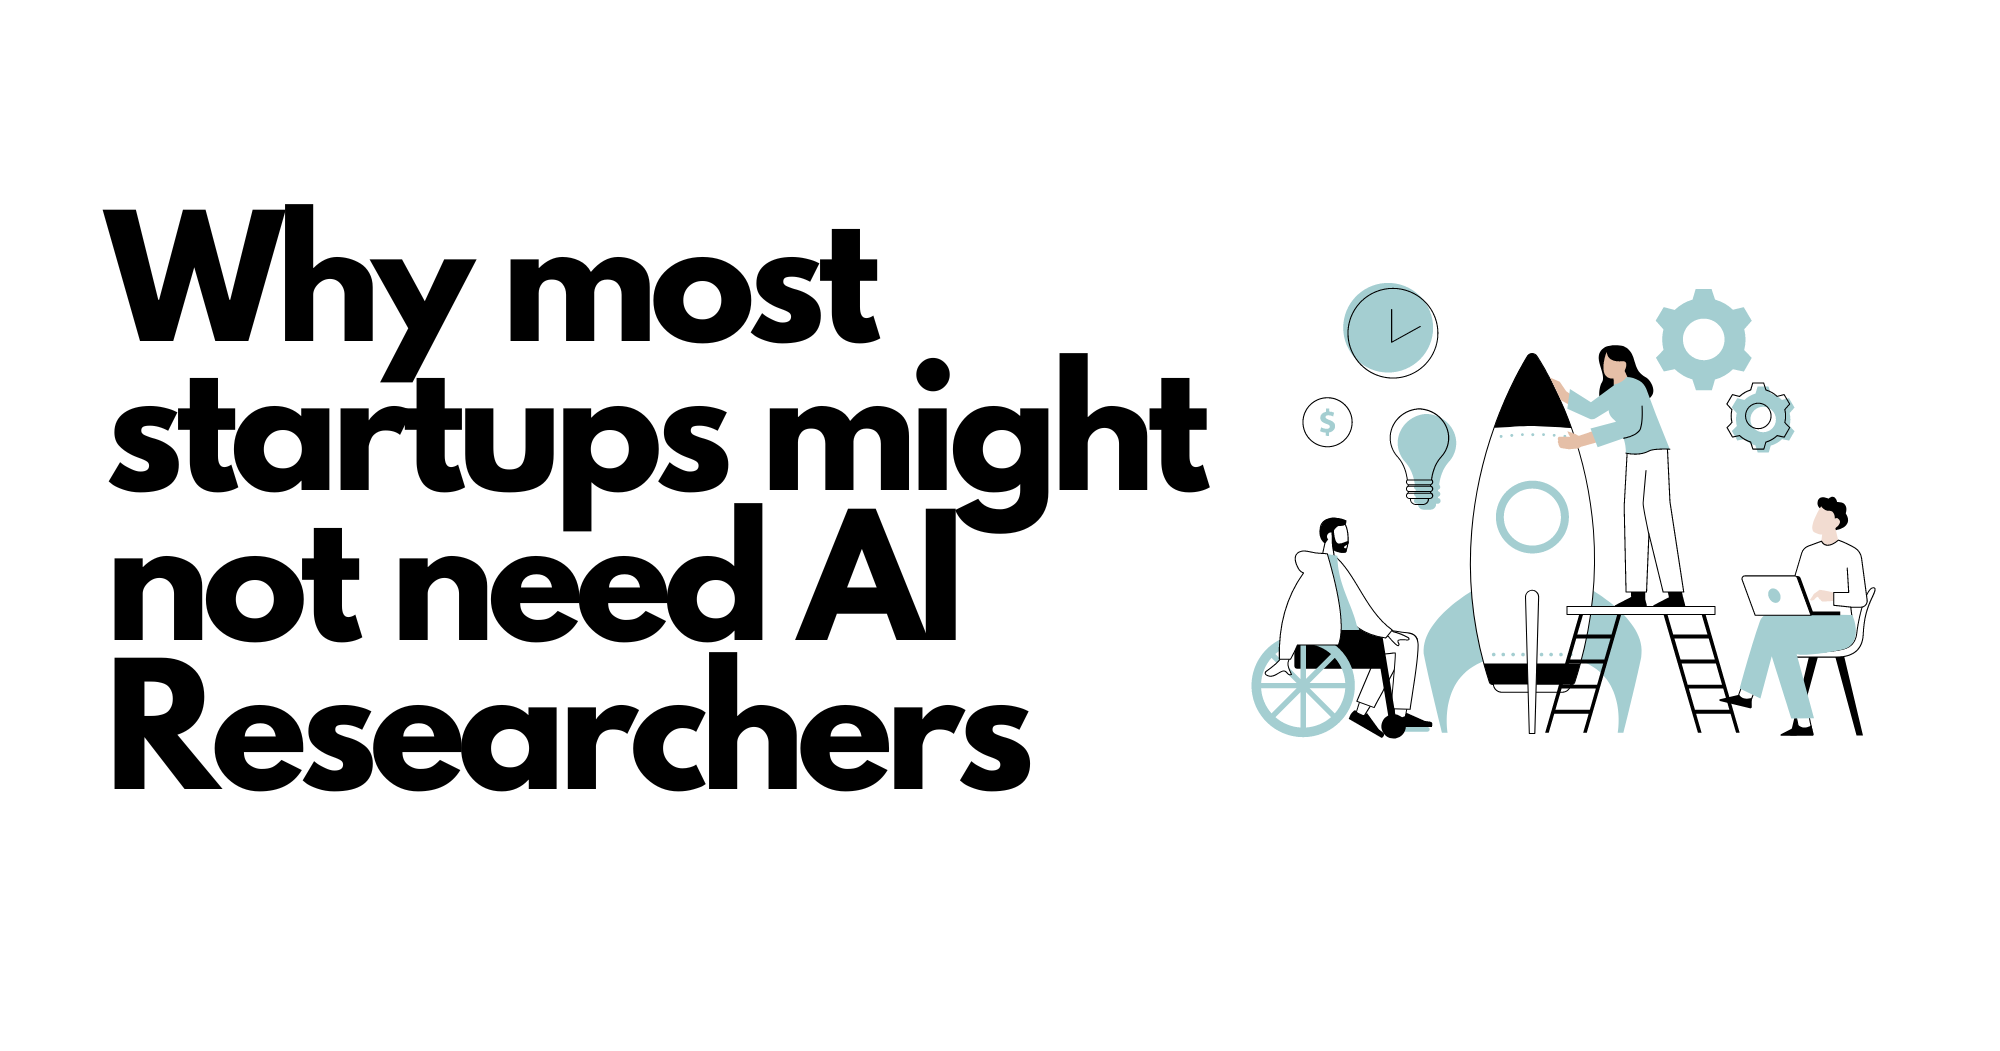 Why most startups might not need AI Researchers?